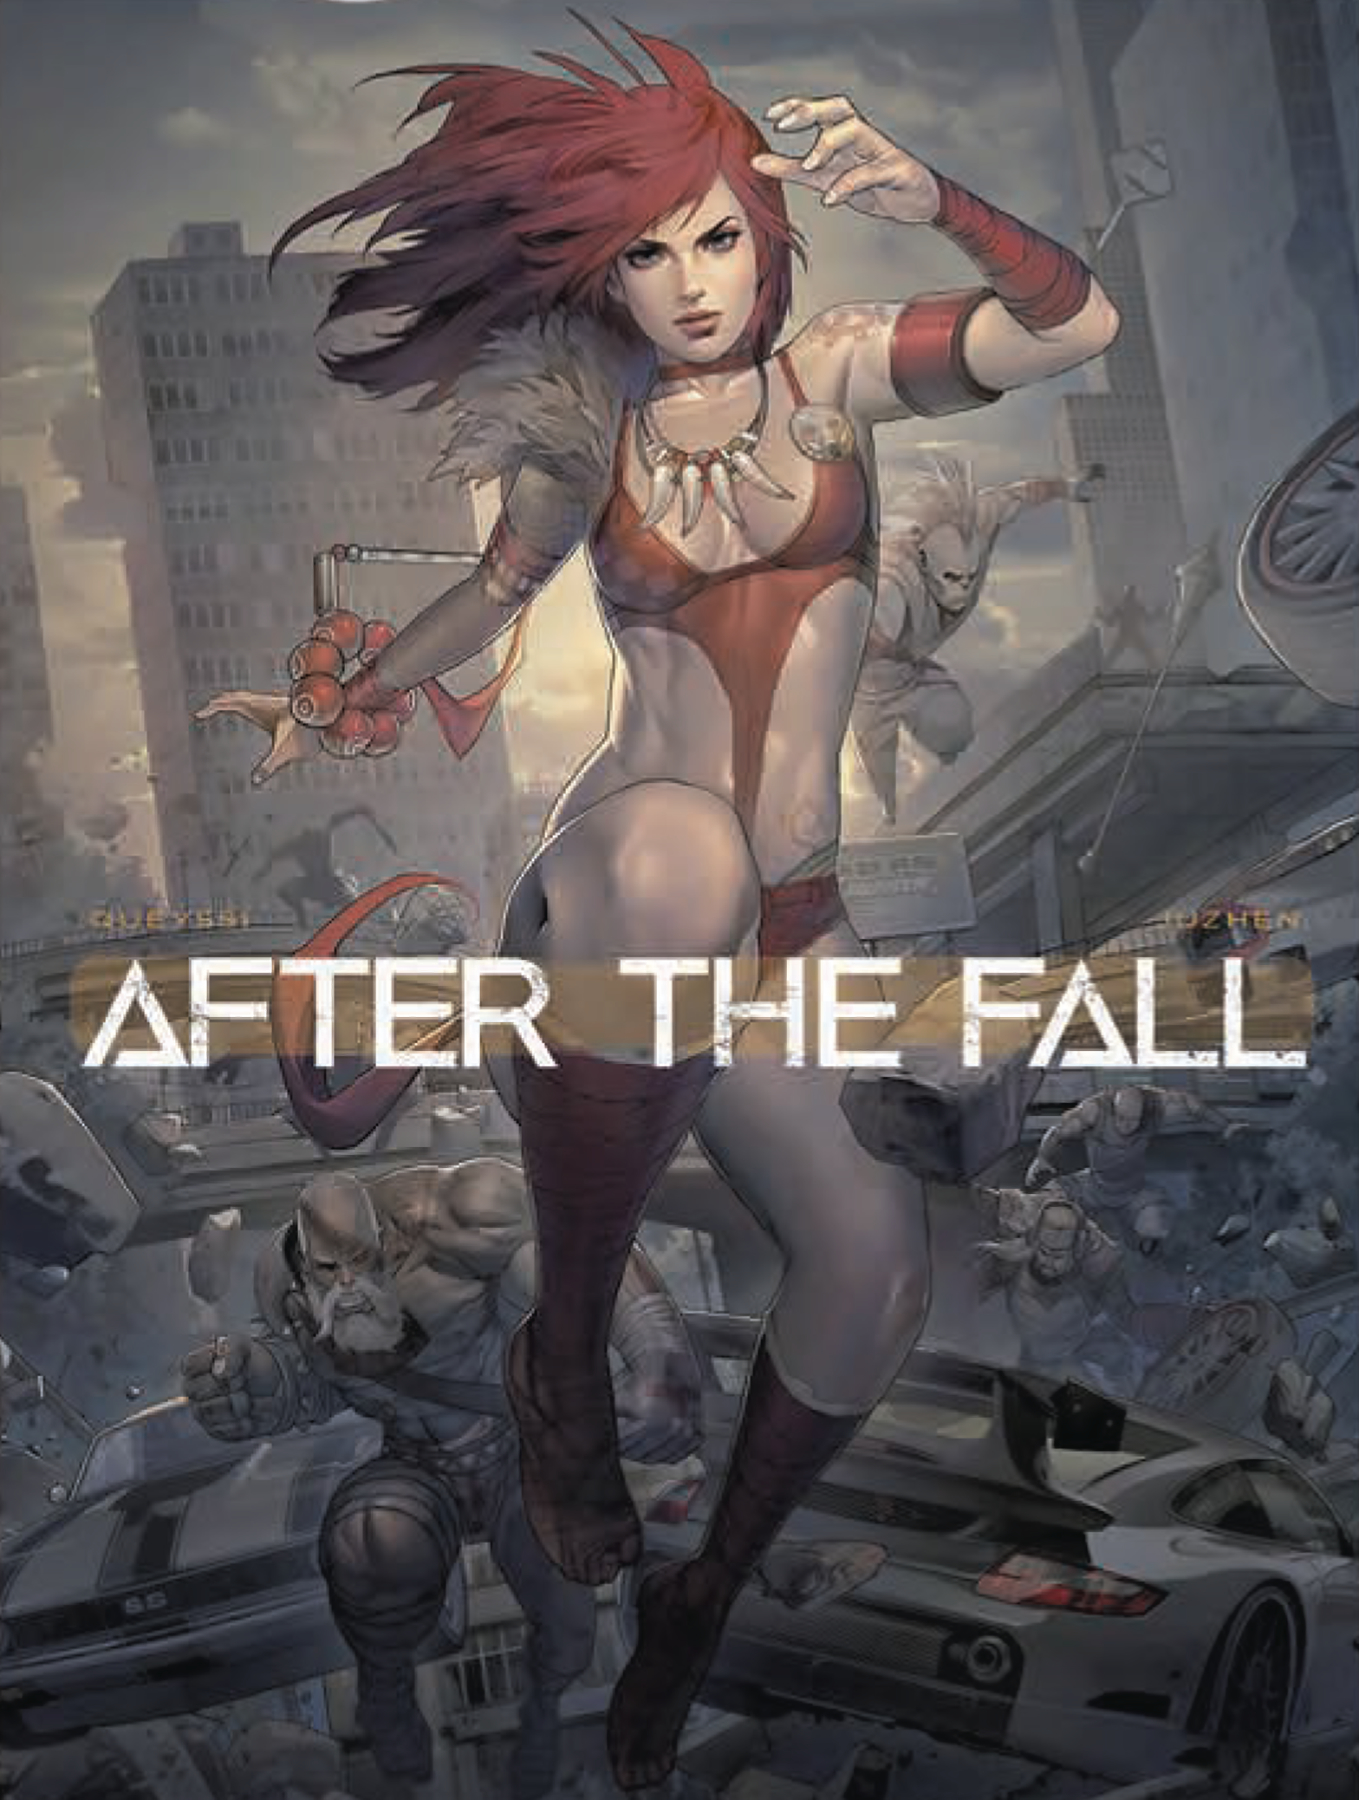 After the Fall Hardcover (Mature)